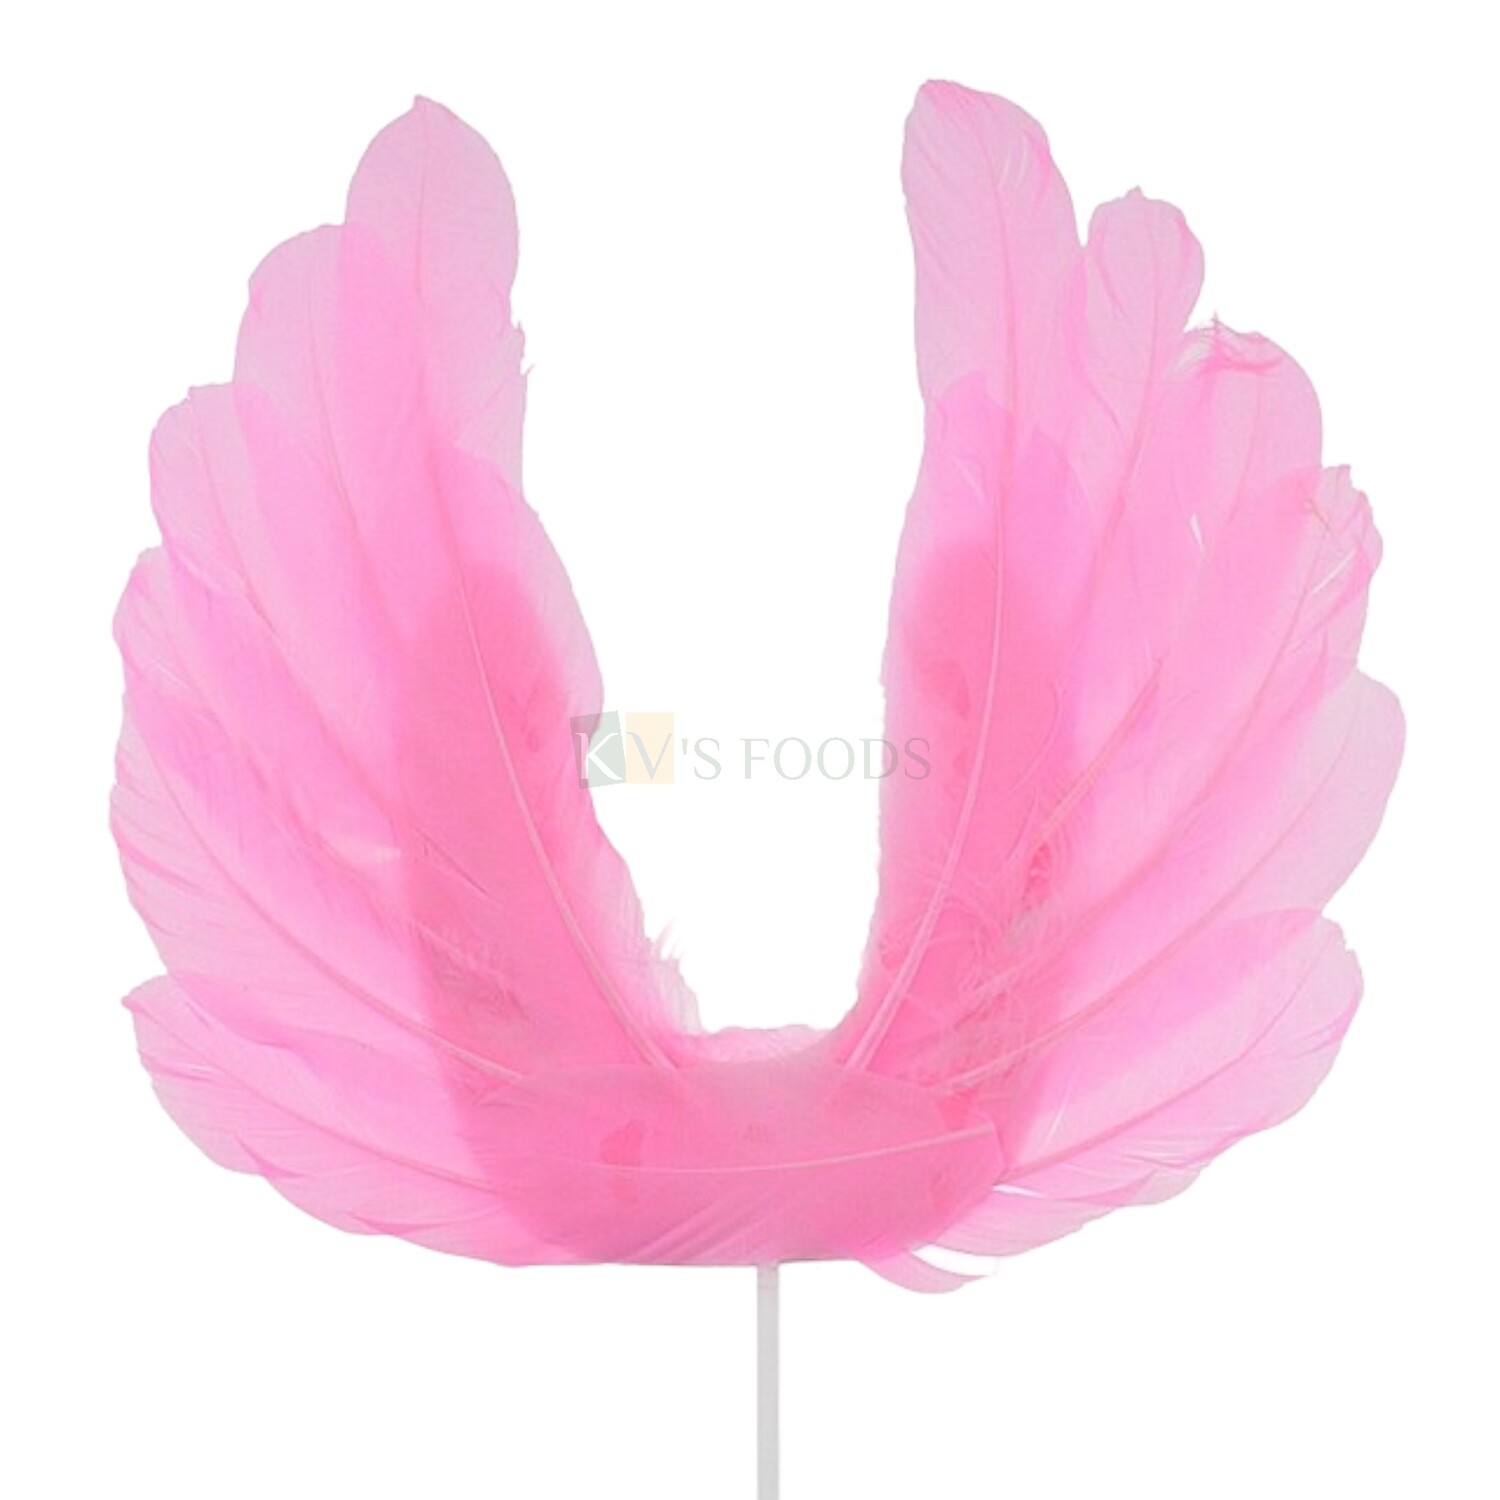 1PC Pink Angel Wing Feather Cake Topper Insert, Reusable Cake Topper, Decorations Items, Cake Decoration Accessories, DIY Cake Decor